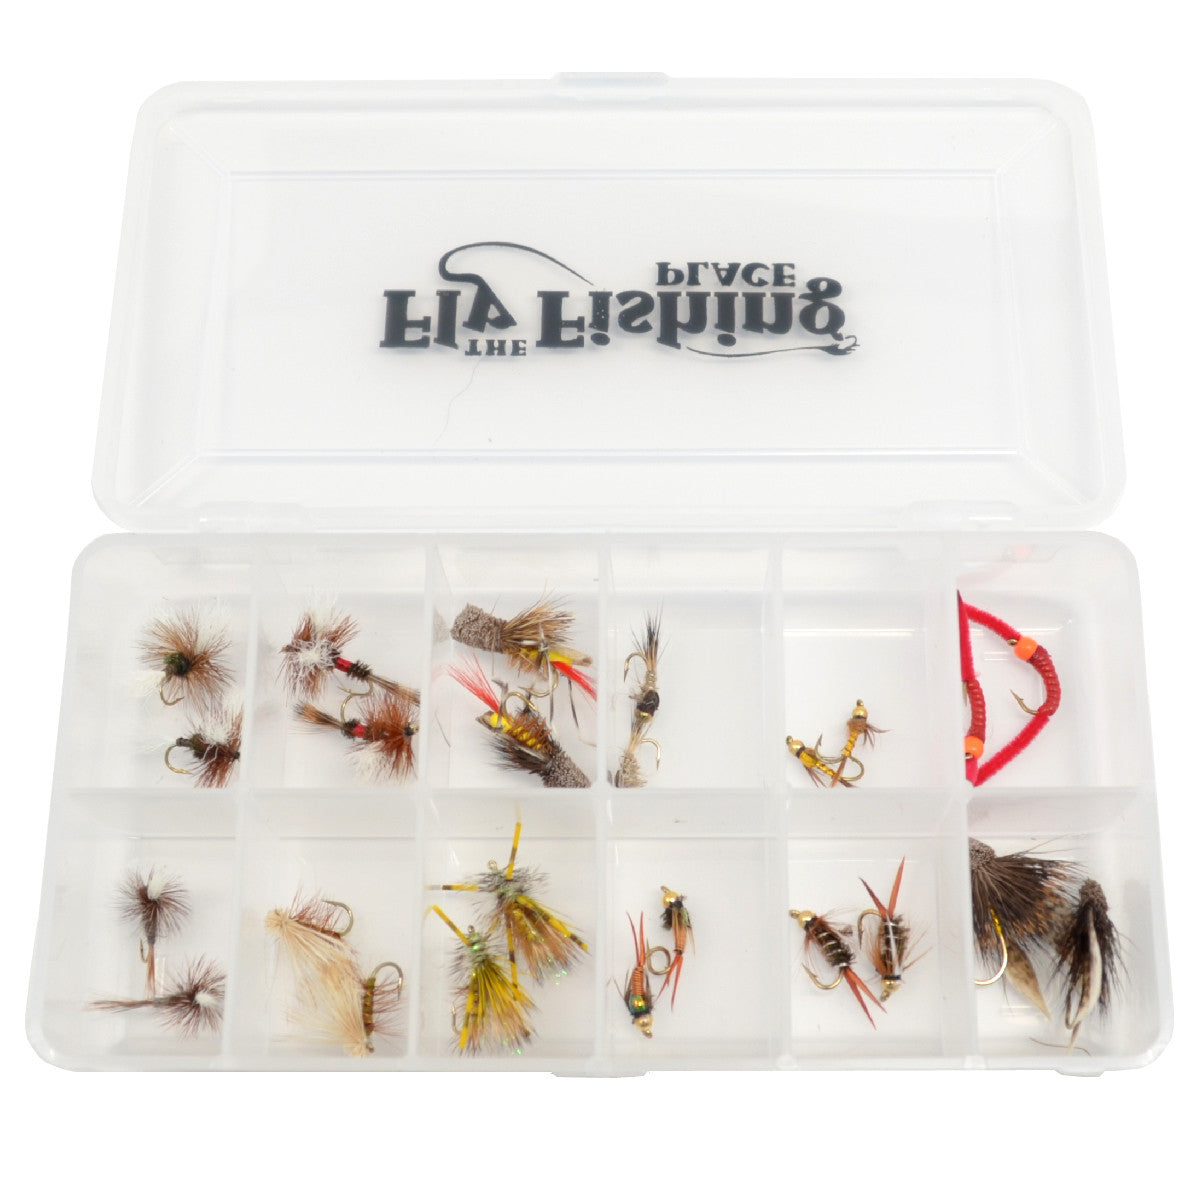 Trout Flies Assortment - 24 Flies for Trout Fly Fishing with Fly Box - Essential Dry and Wet Fly Selection for All Trout Fly Fishing